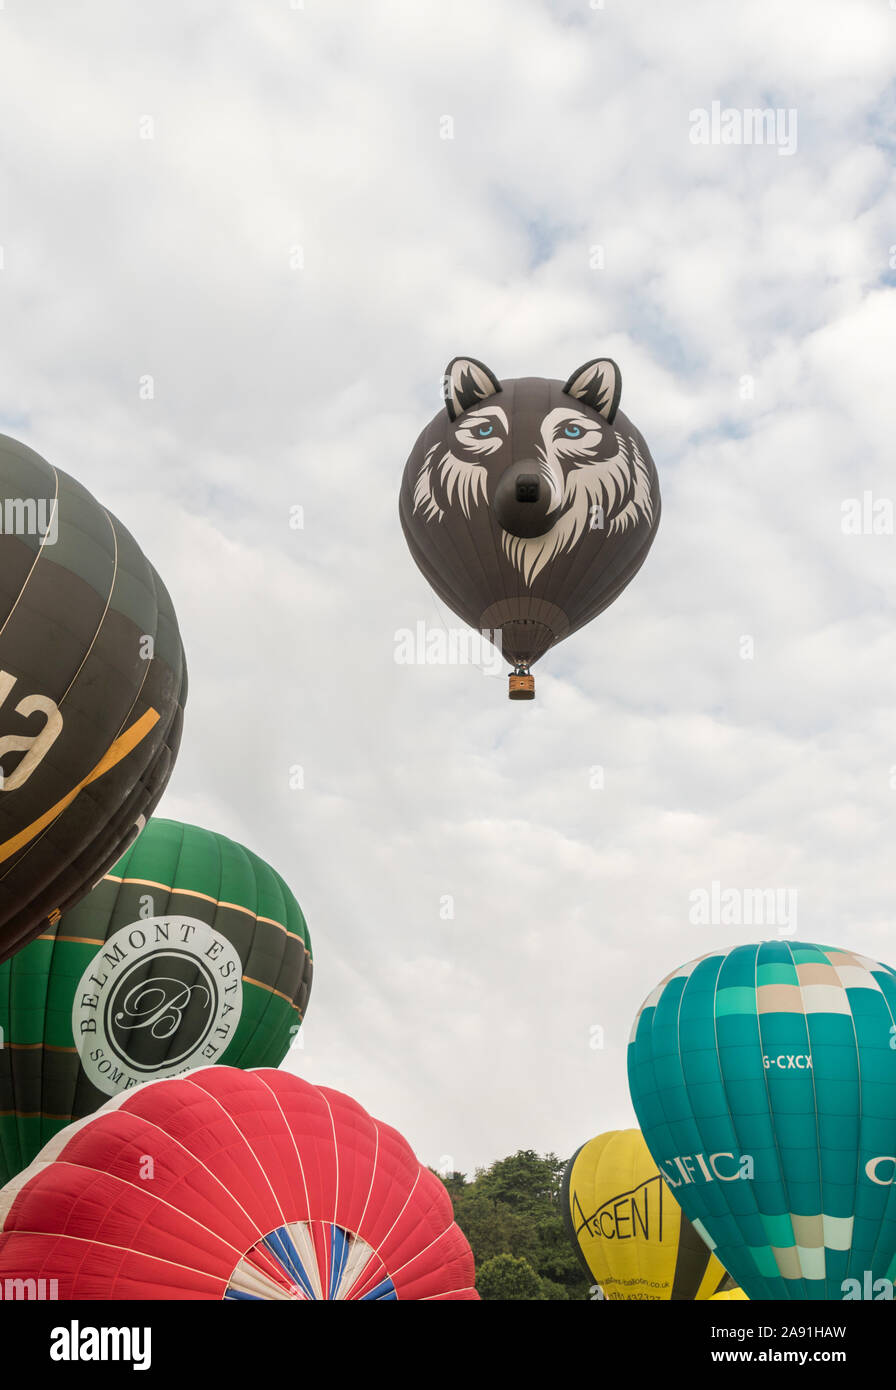 The Wolf, a special shape at the mass ascent of hot air balloons from the launch site at Ashton Court Estate for the 2019 Bristol Balloon Fiesta Stock Photo